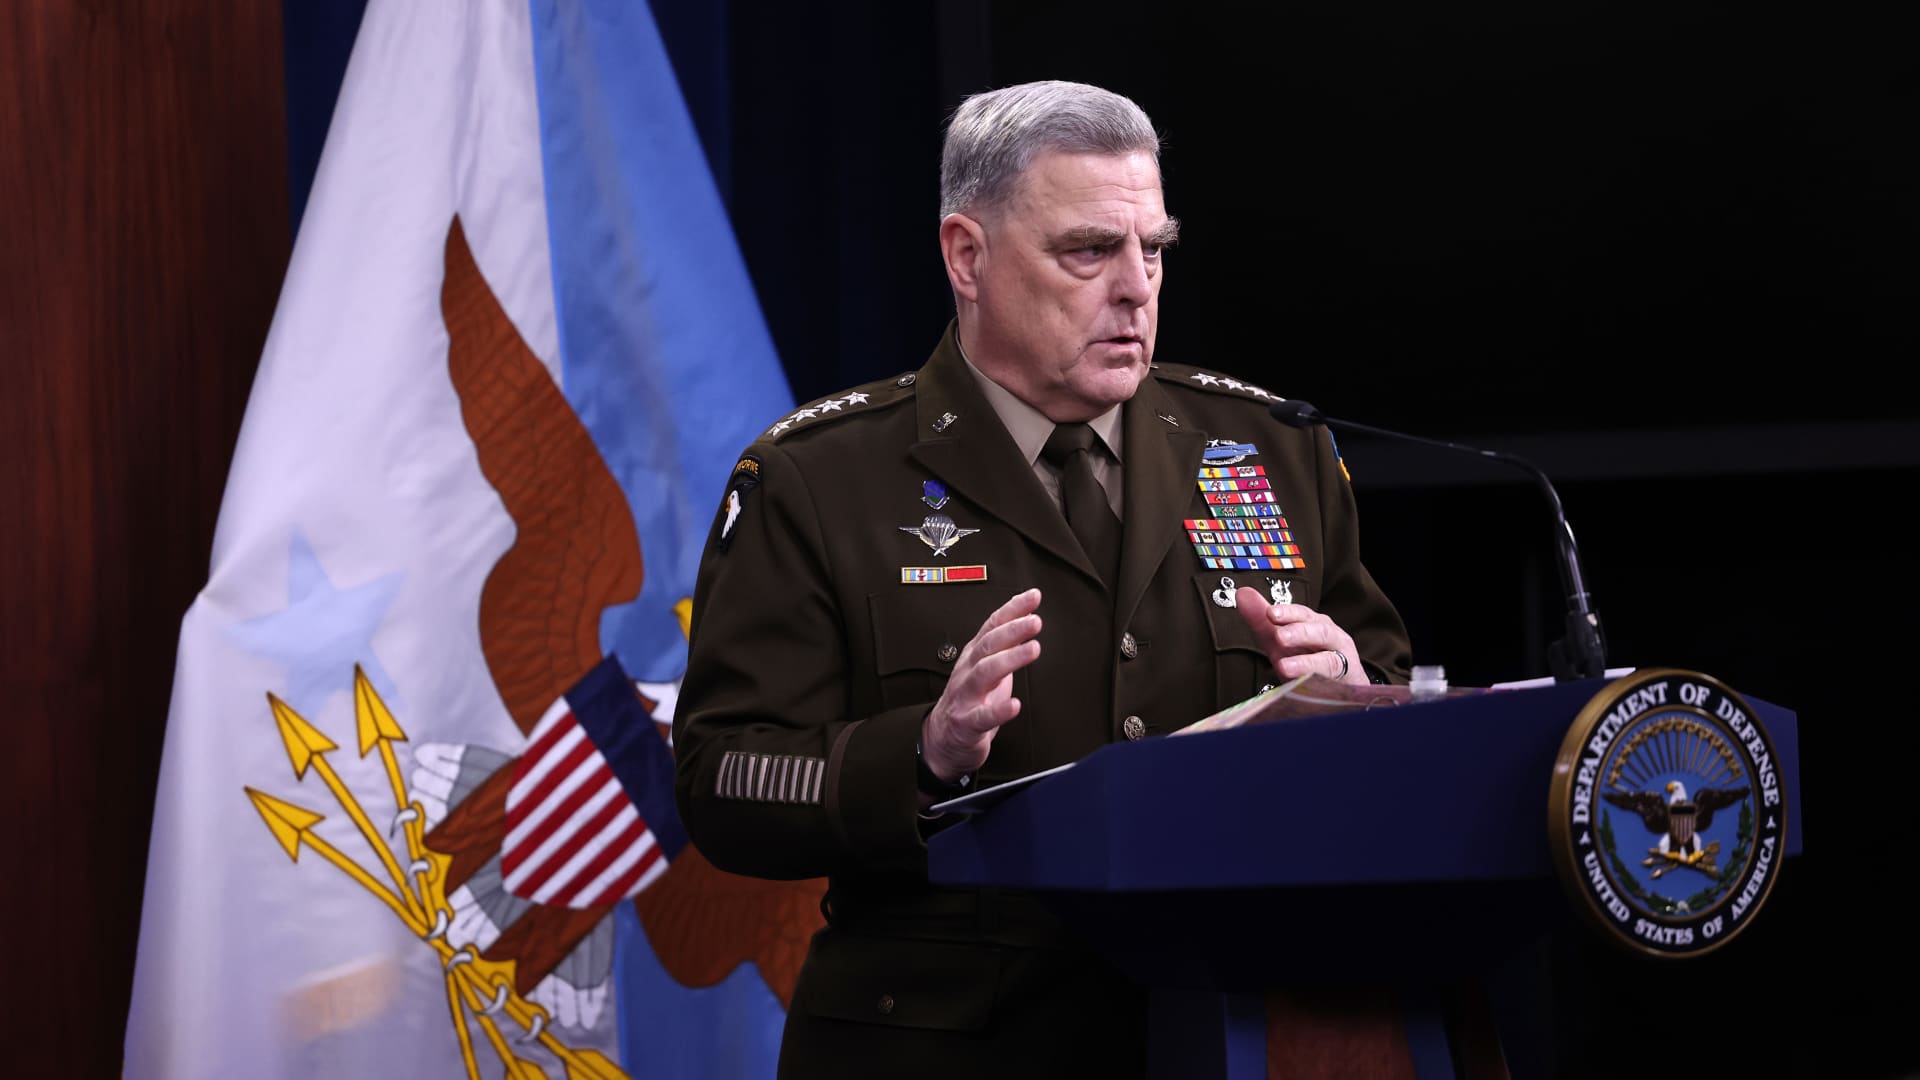 Chairman of the Joint Chiefs of Staff General Mark Milley at a news briefing at the Pentagon on July 20, 2022 in Arlington, Virginia.